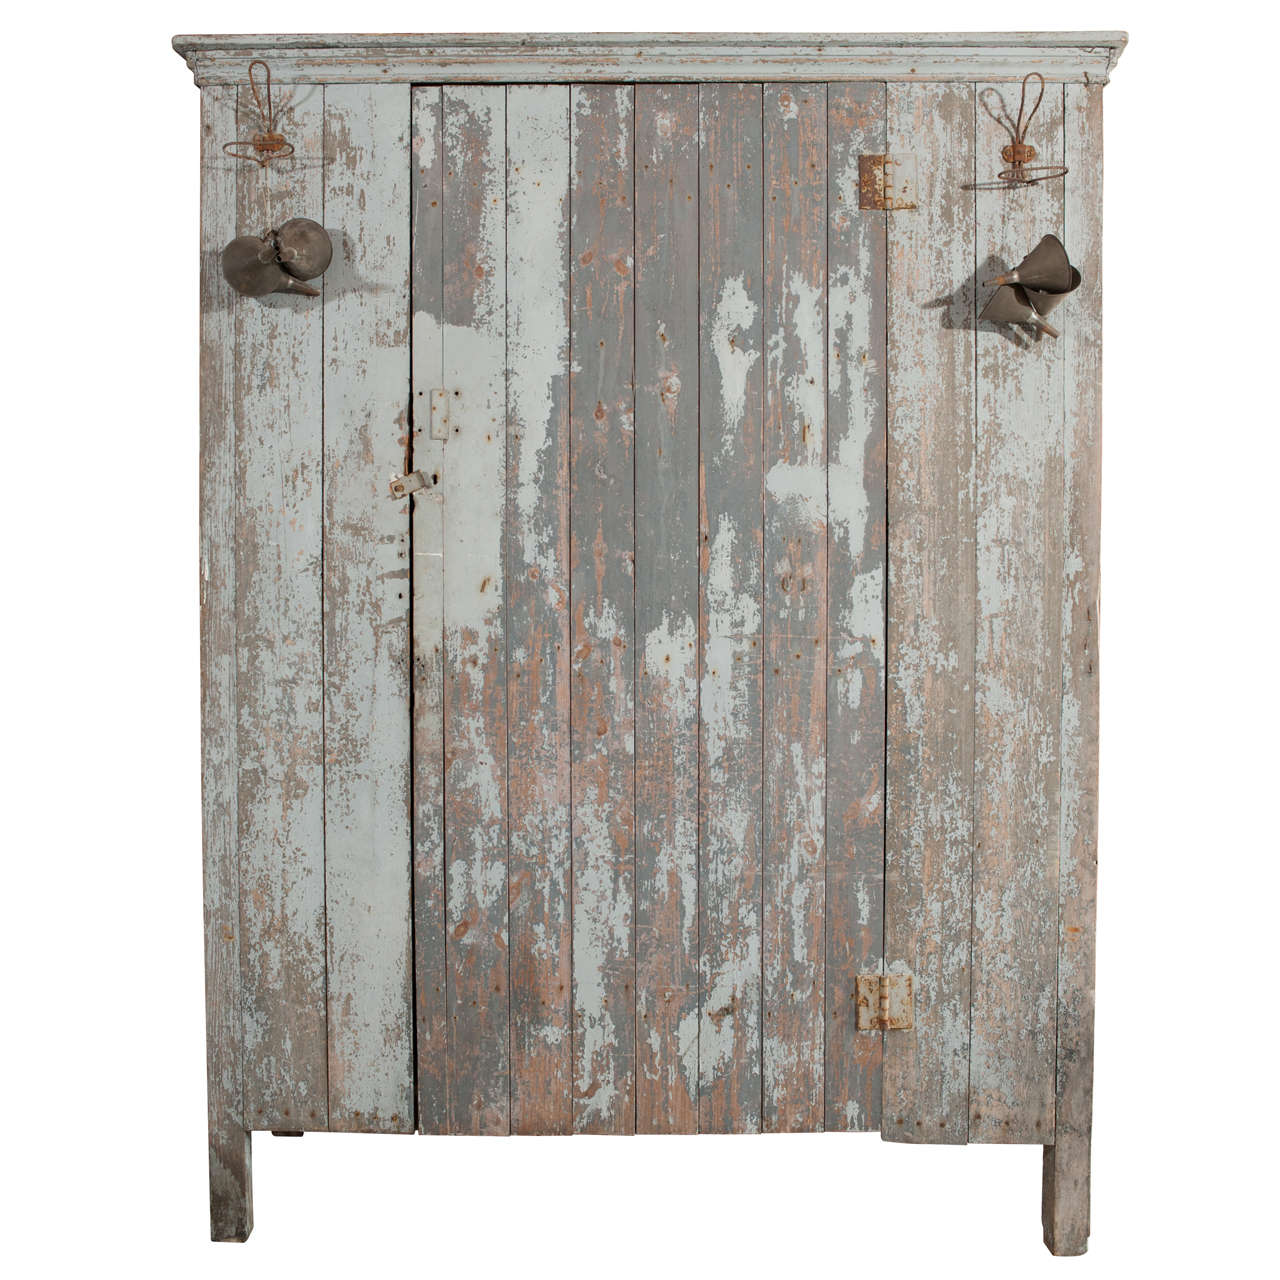 19th century painted pantry For Sale